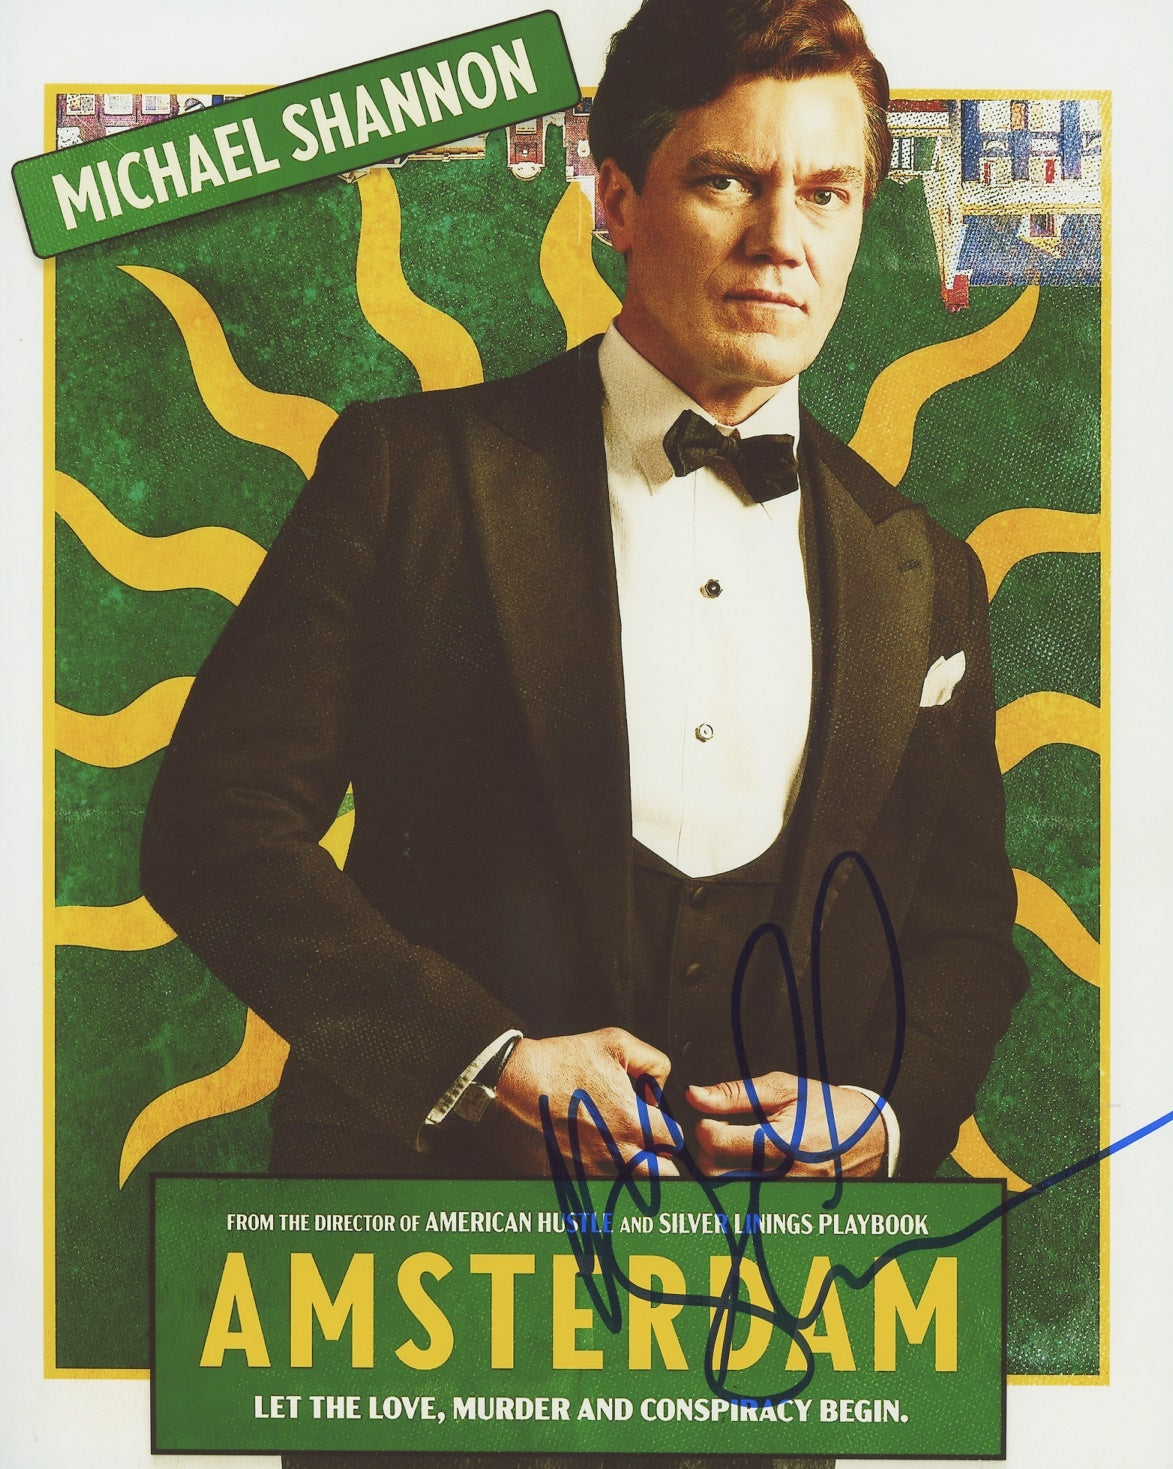 Michael Shannon Signed 8x10 Photo